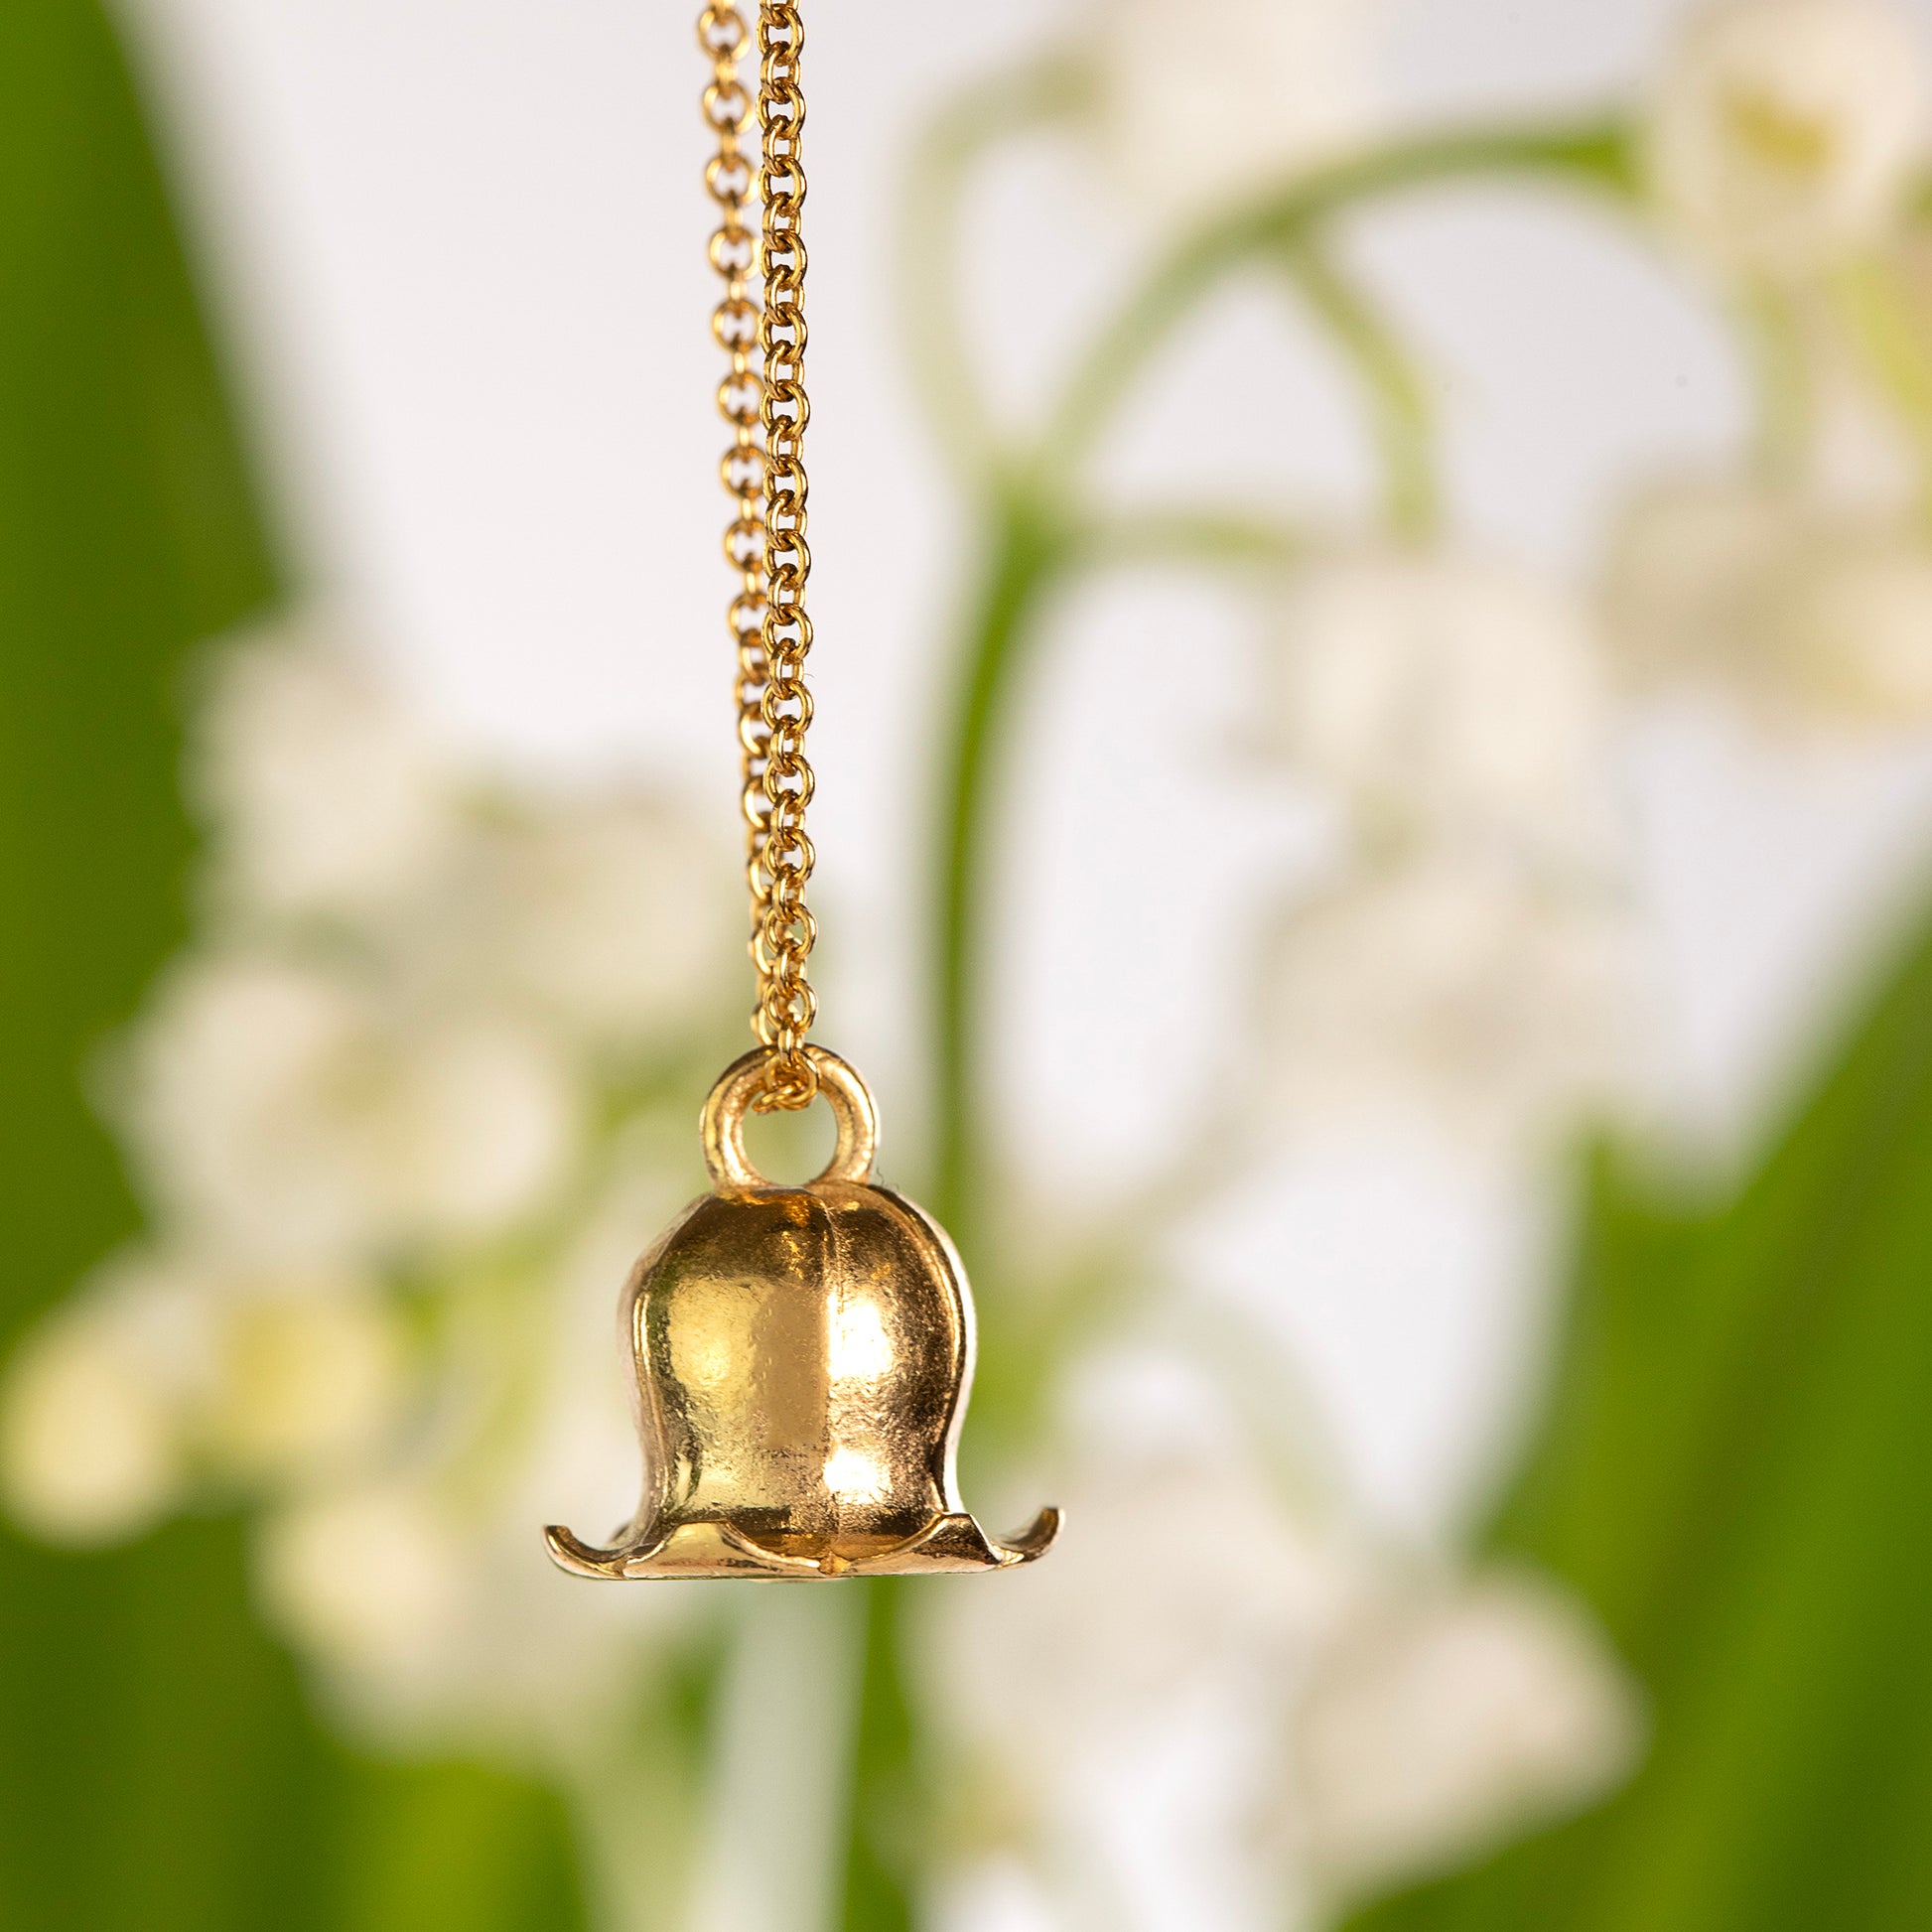 lily of the valley necklace